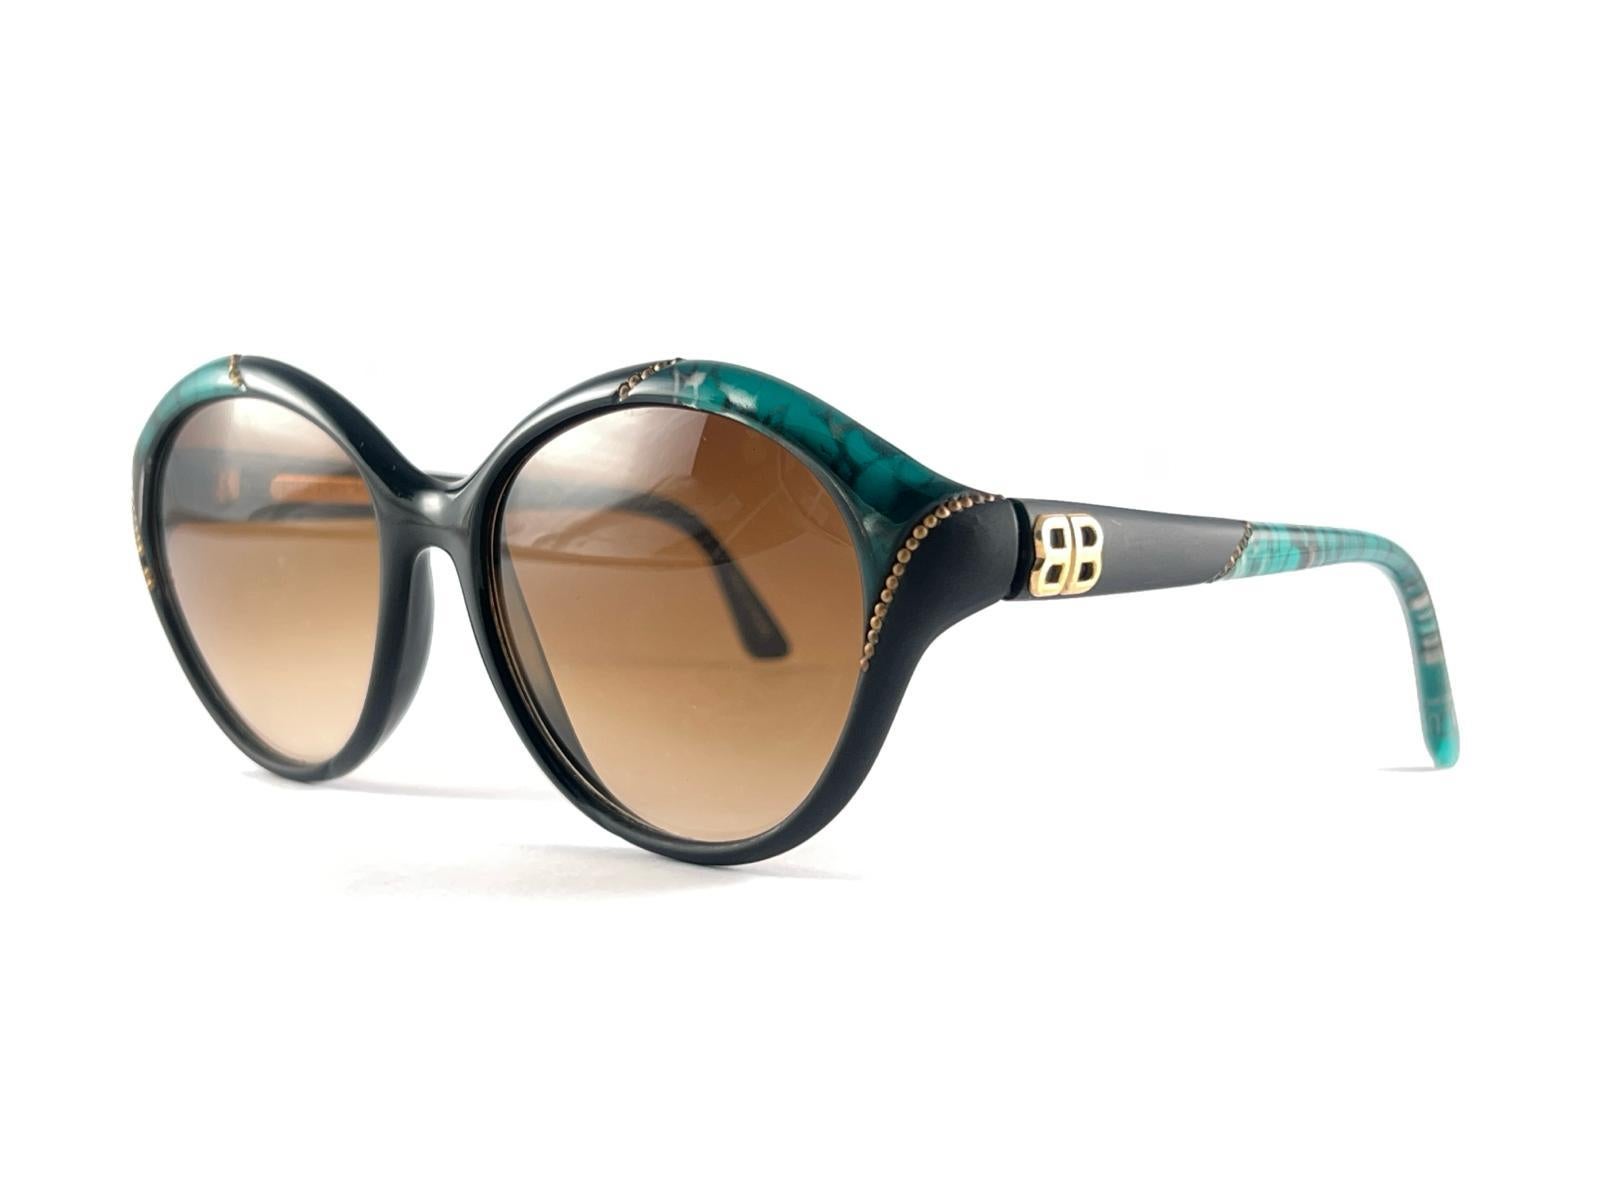 Vintage Balenciaga 2053 Black & Gold Accents 1980's Sunglasses Made in France For Sale 9